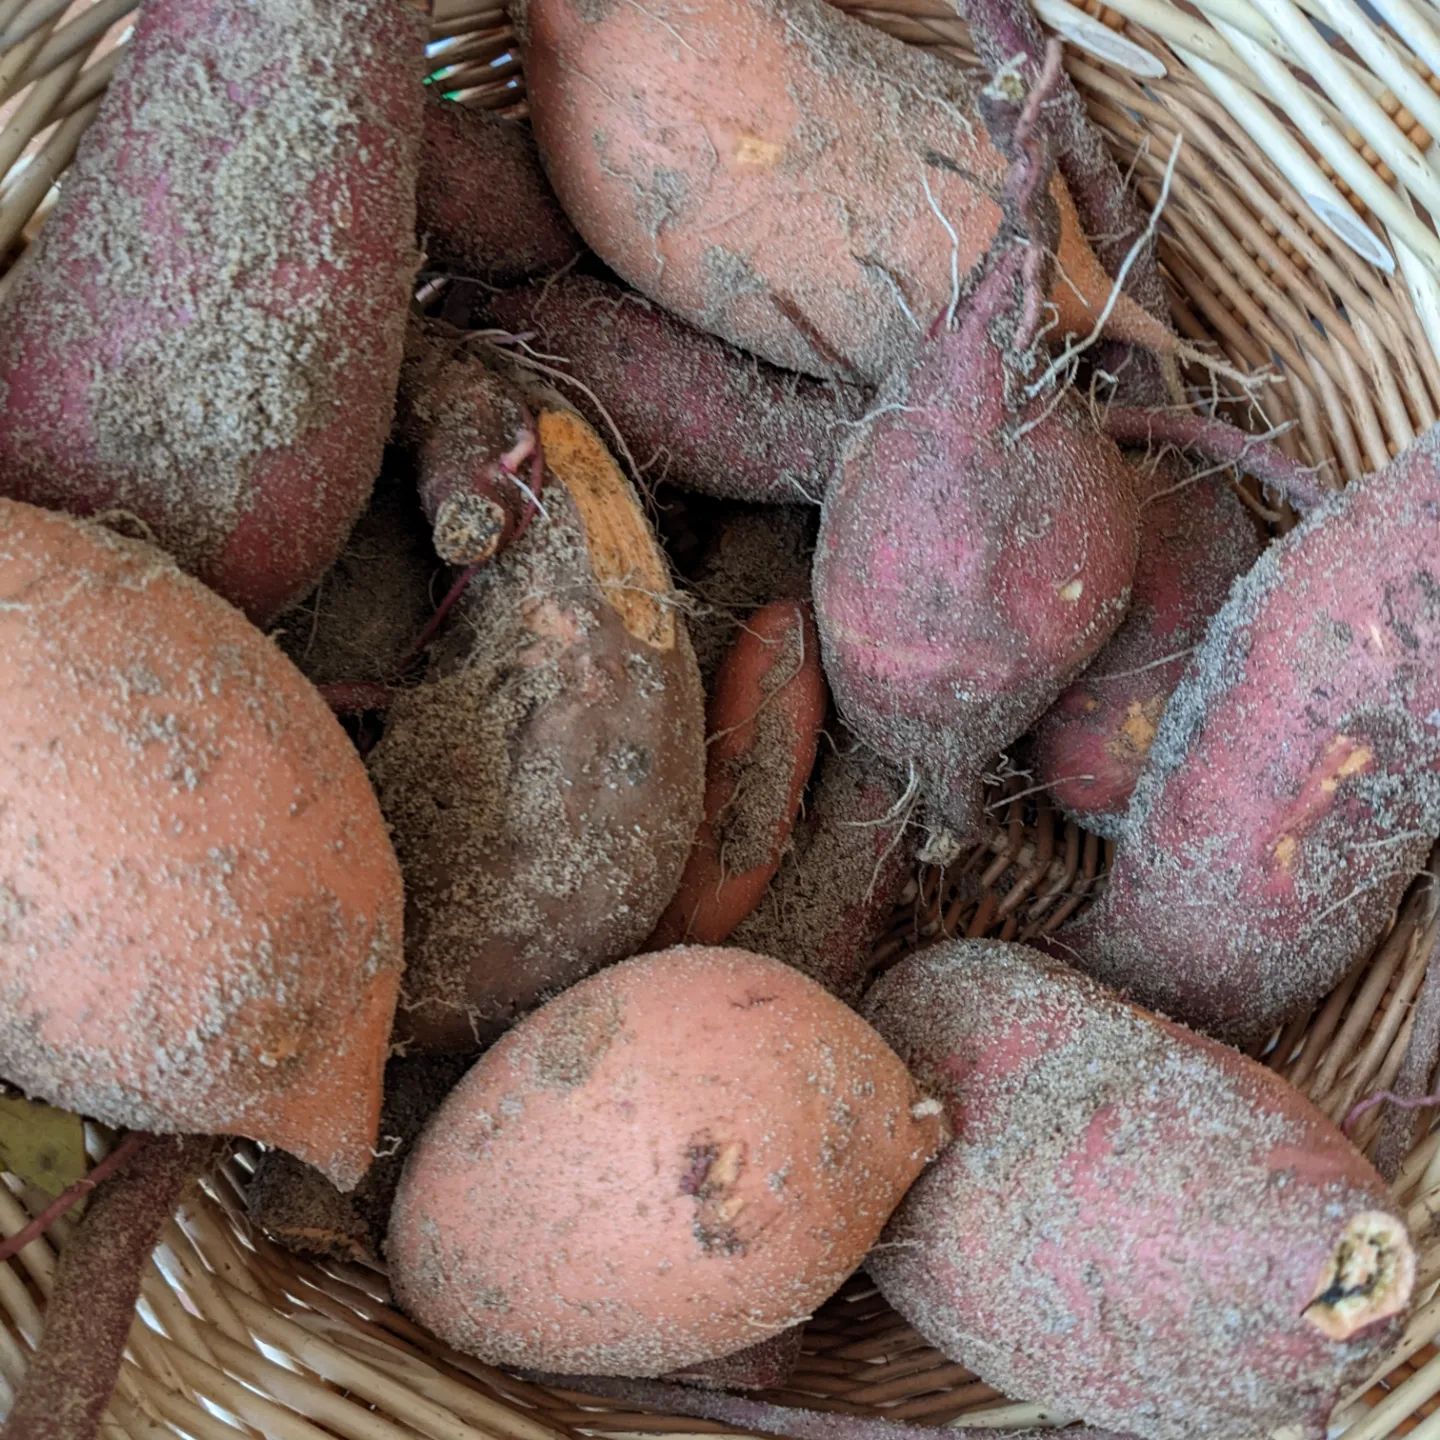 We harvested a few sweet potatoes and a surprise